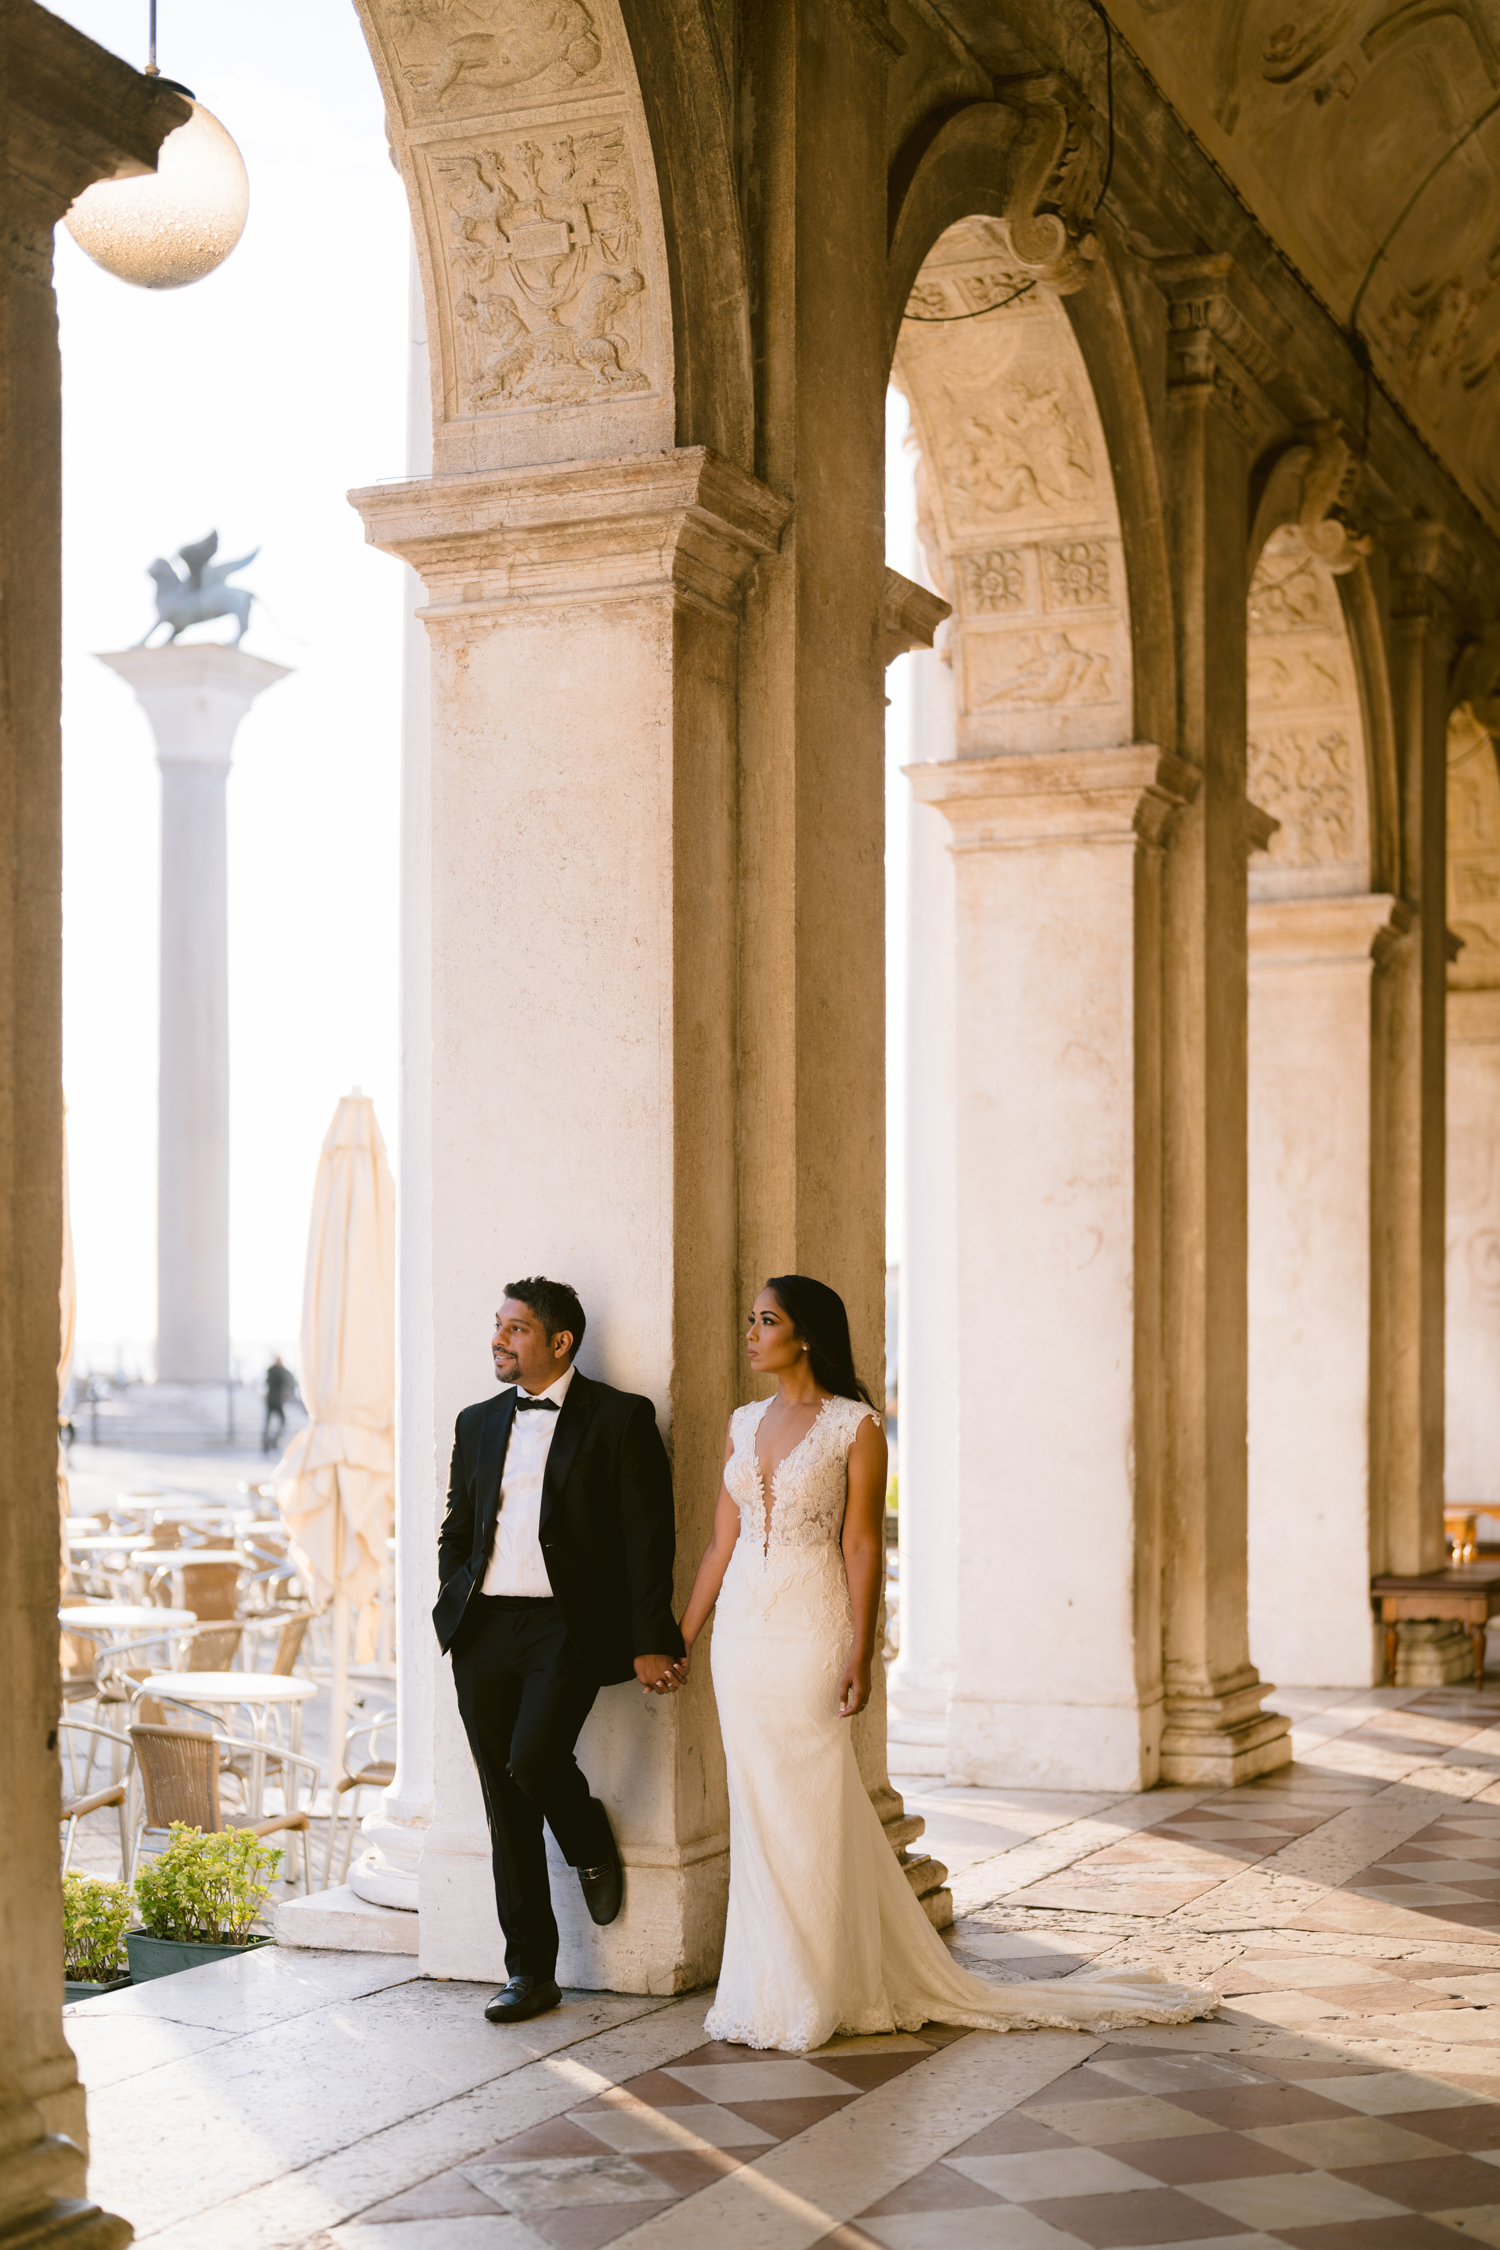 Venice photographer Alina Indi is the best vendor for your wedding, engagement, editorial, elopement, anniversary, honeymoon photoshoot in Italy.